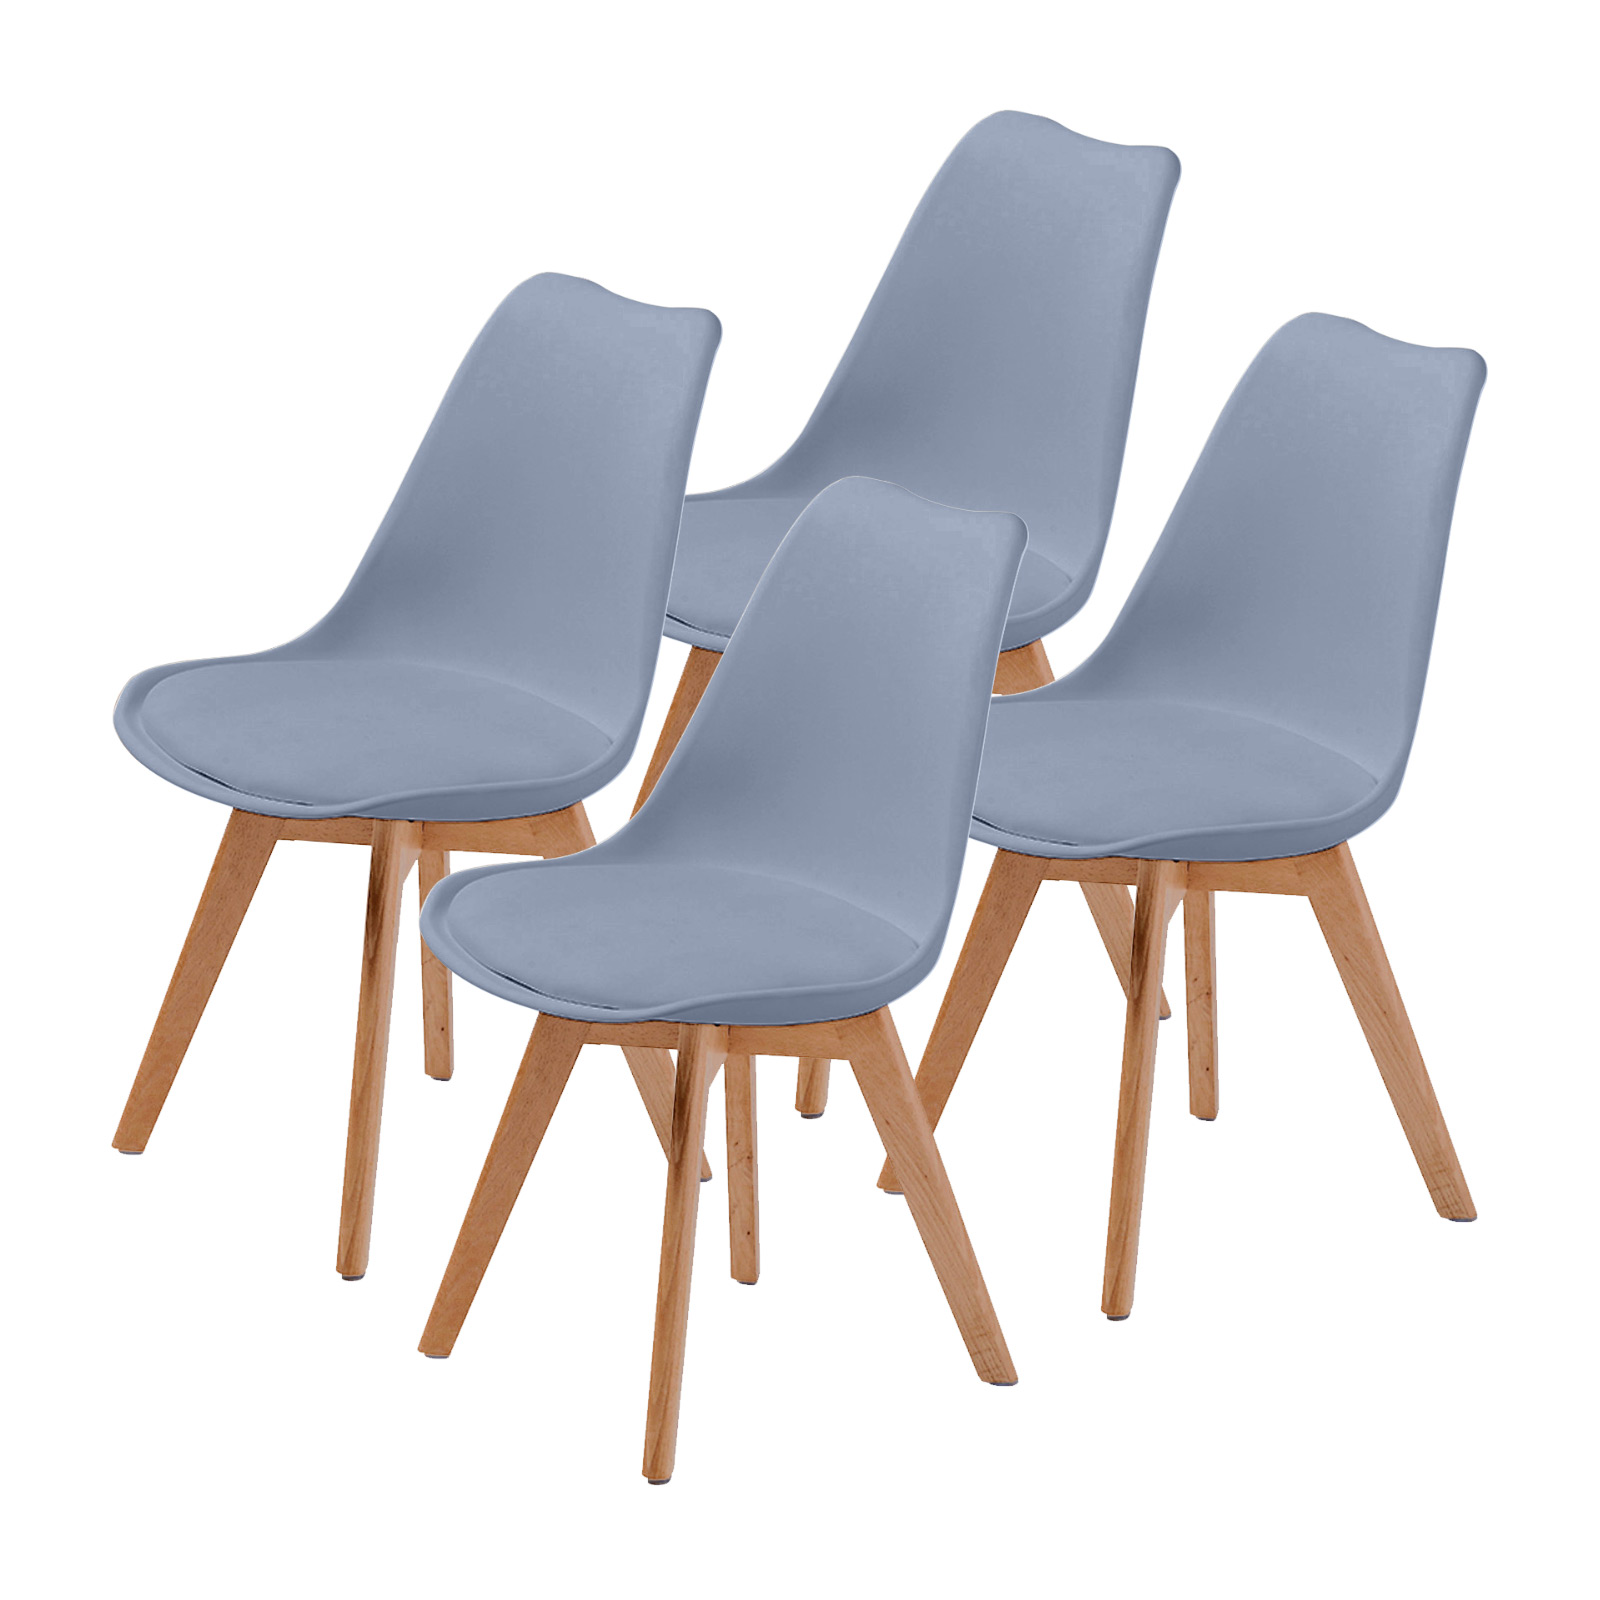 4X Padded Seat Dining Chair - GREY